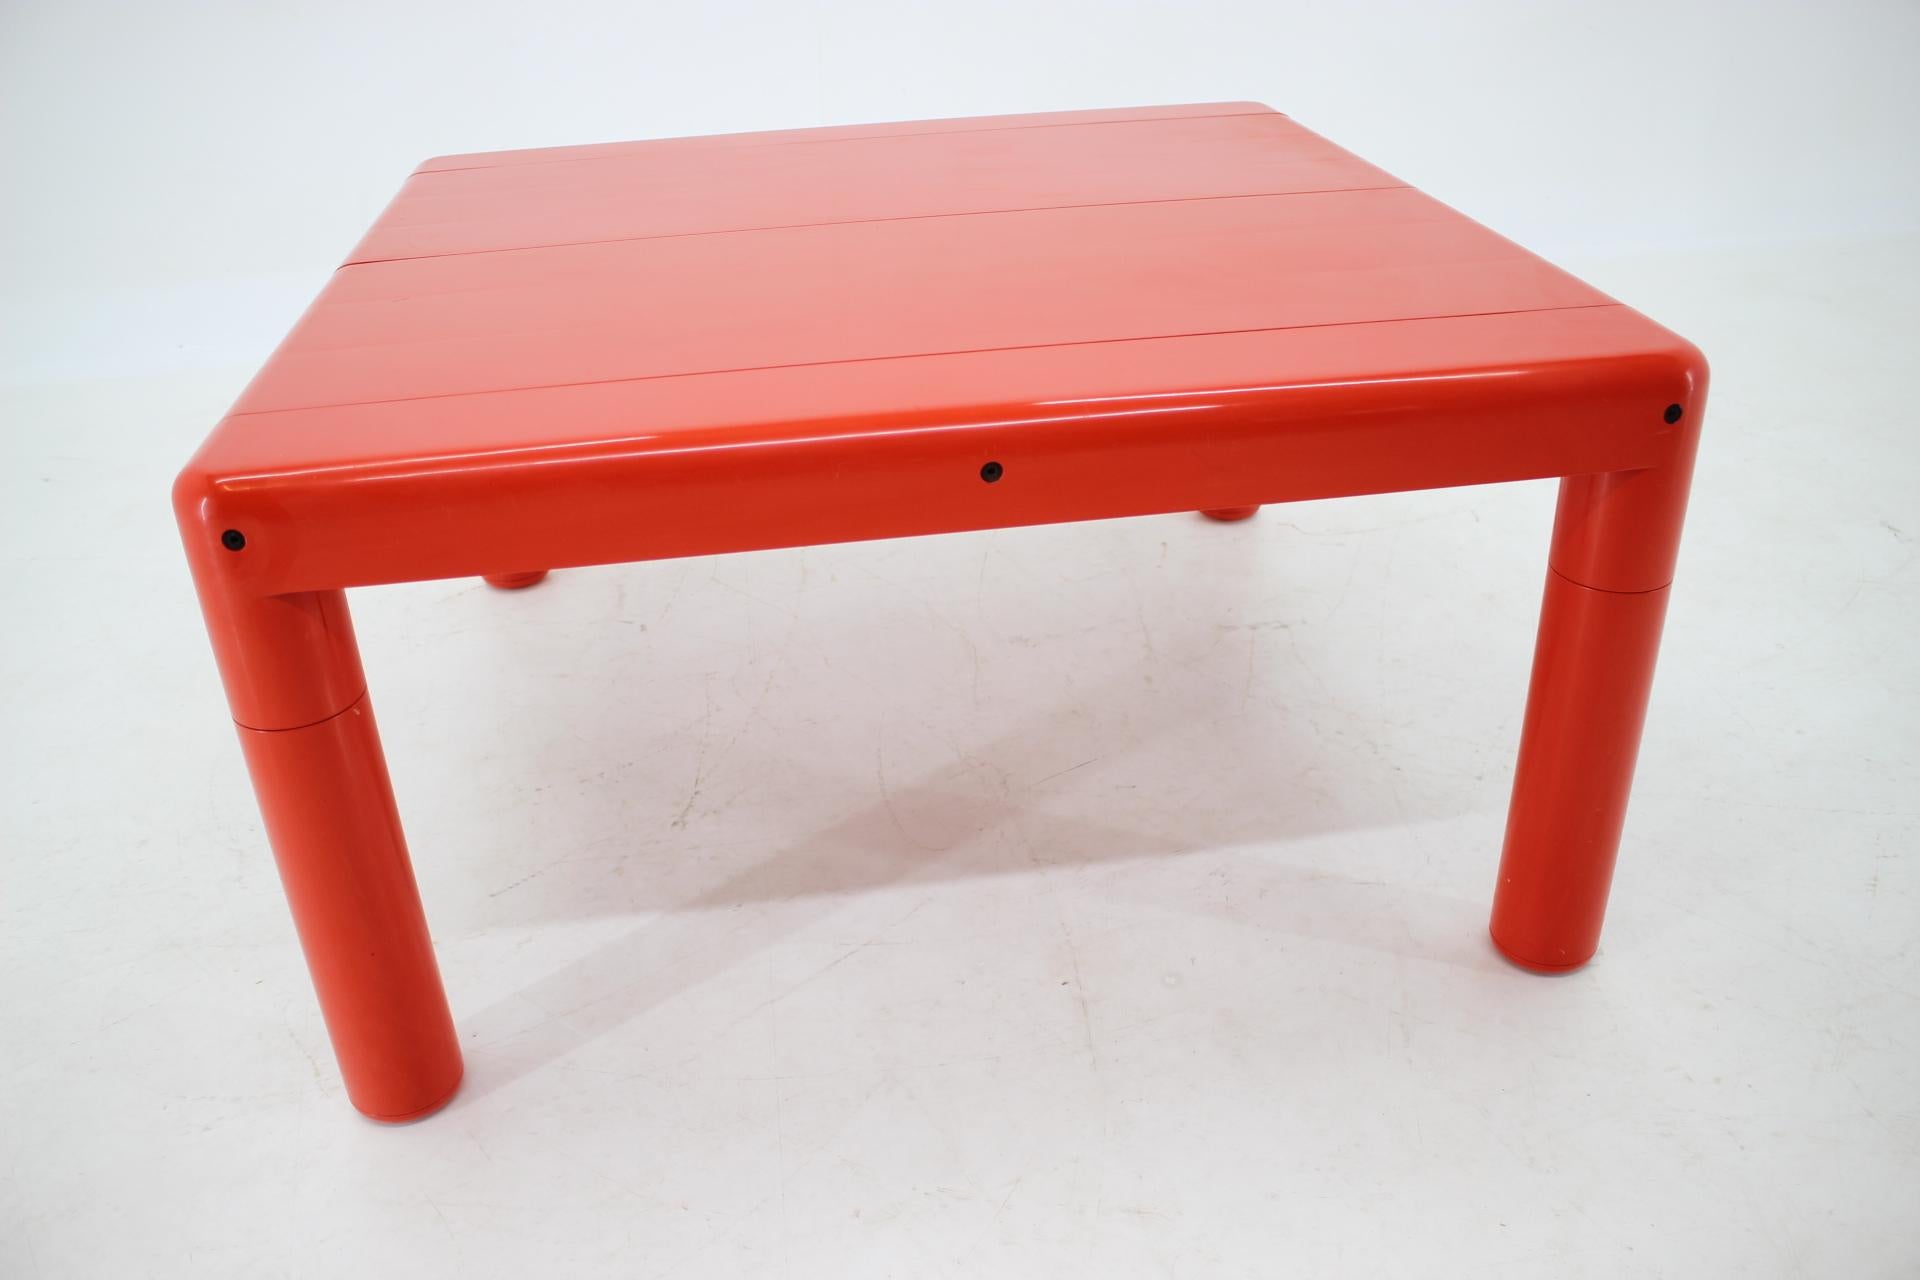 Midcentury Space Age Coffee Table UPO, Eero Aarnio, Finland, 1970s For Sale 4